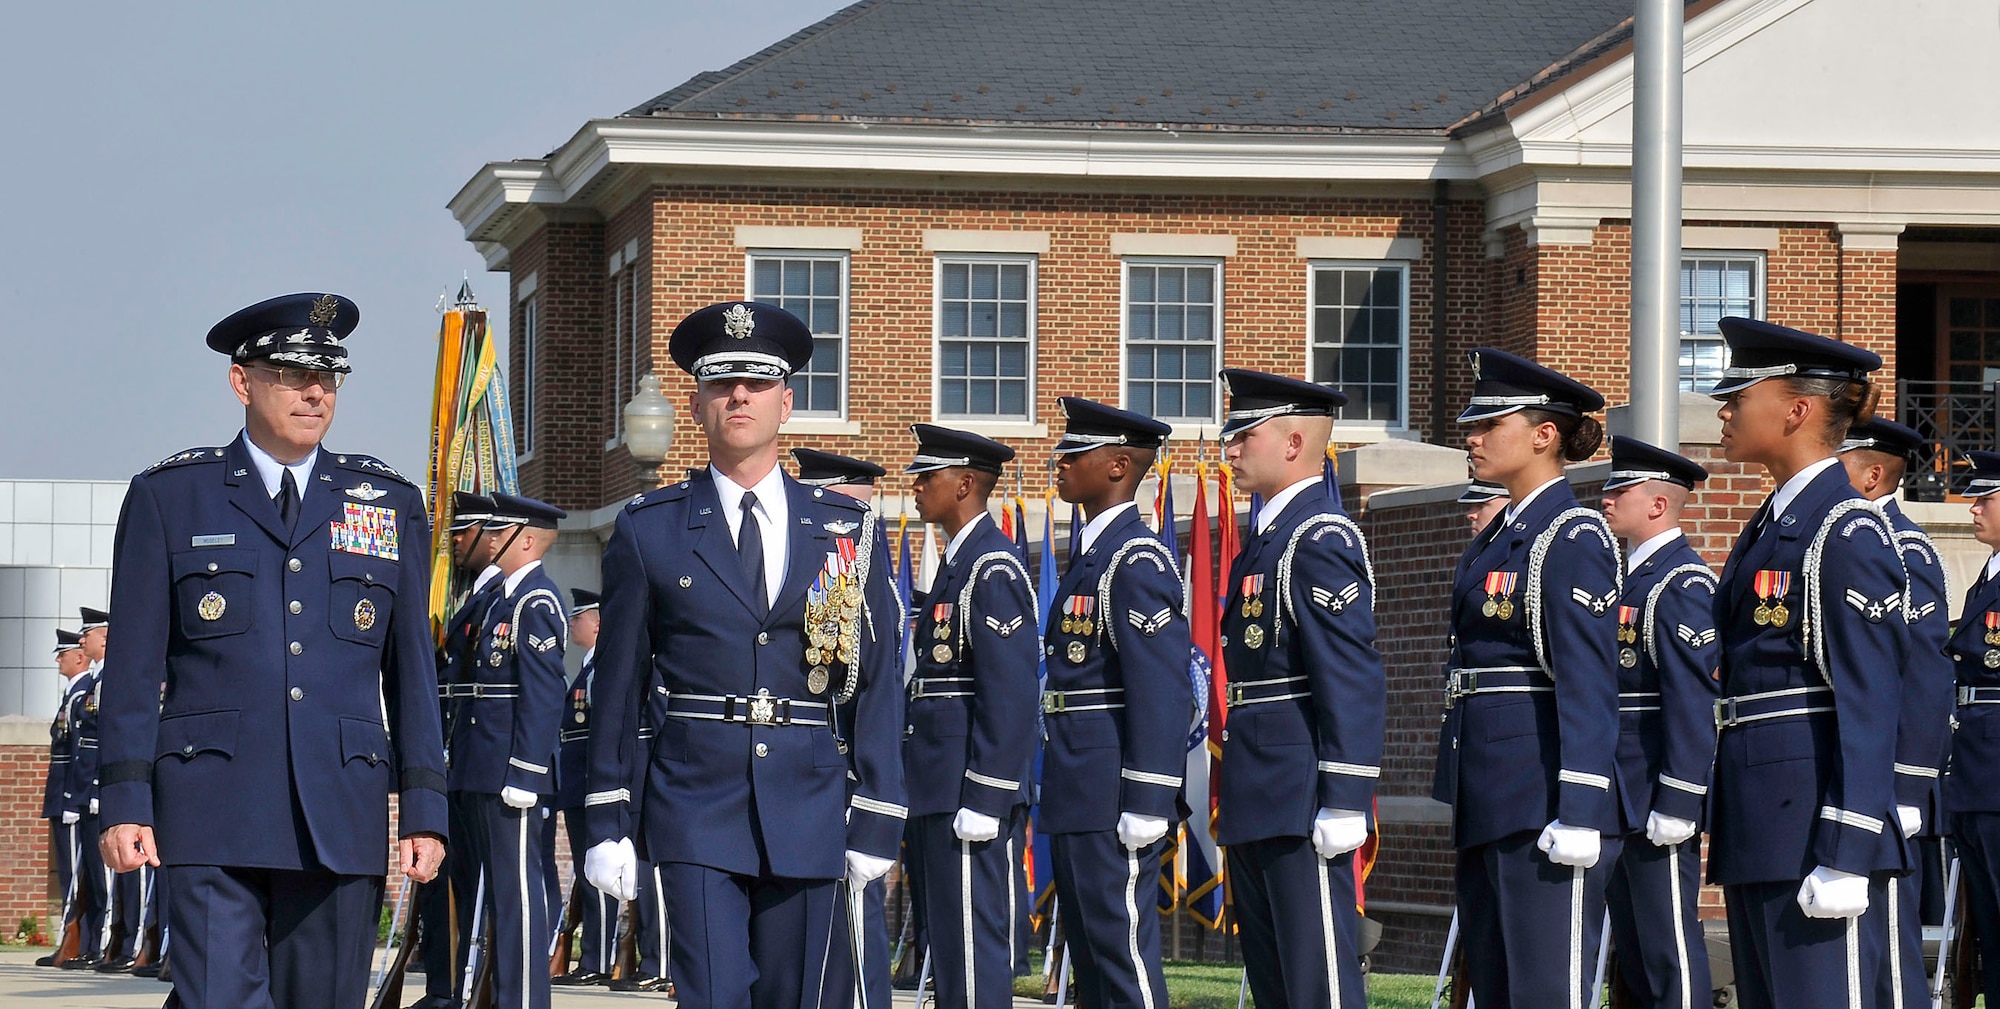 Gen. T. Michael Moseley reviews the troops with Lt. Col. Anthony Taylor, commander of the United States Honor Guard, during the former's retirement ceremony on Bolling Air Force Base, D.C., July 11. General Moseley is the 18th Chief of Staff. (U.S. Air Force photo/Scott M. Ash)